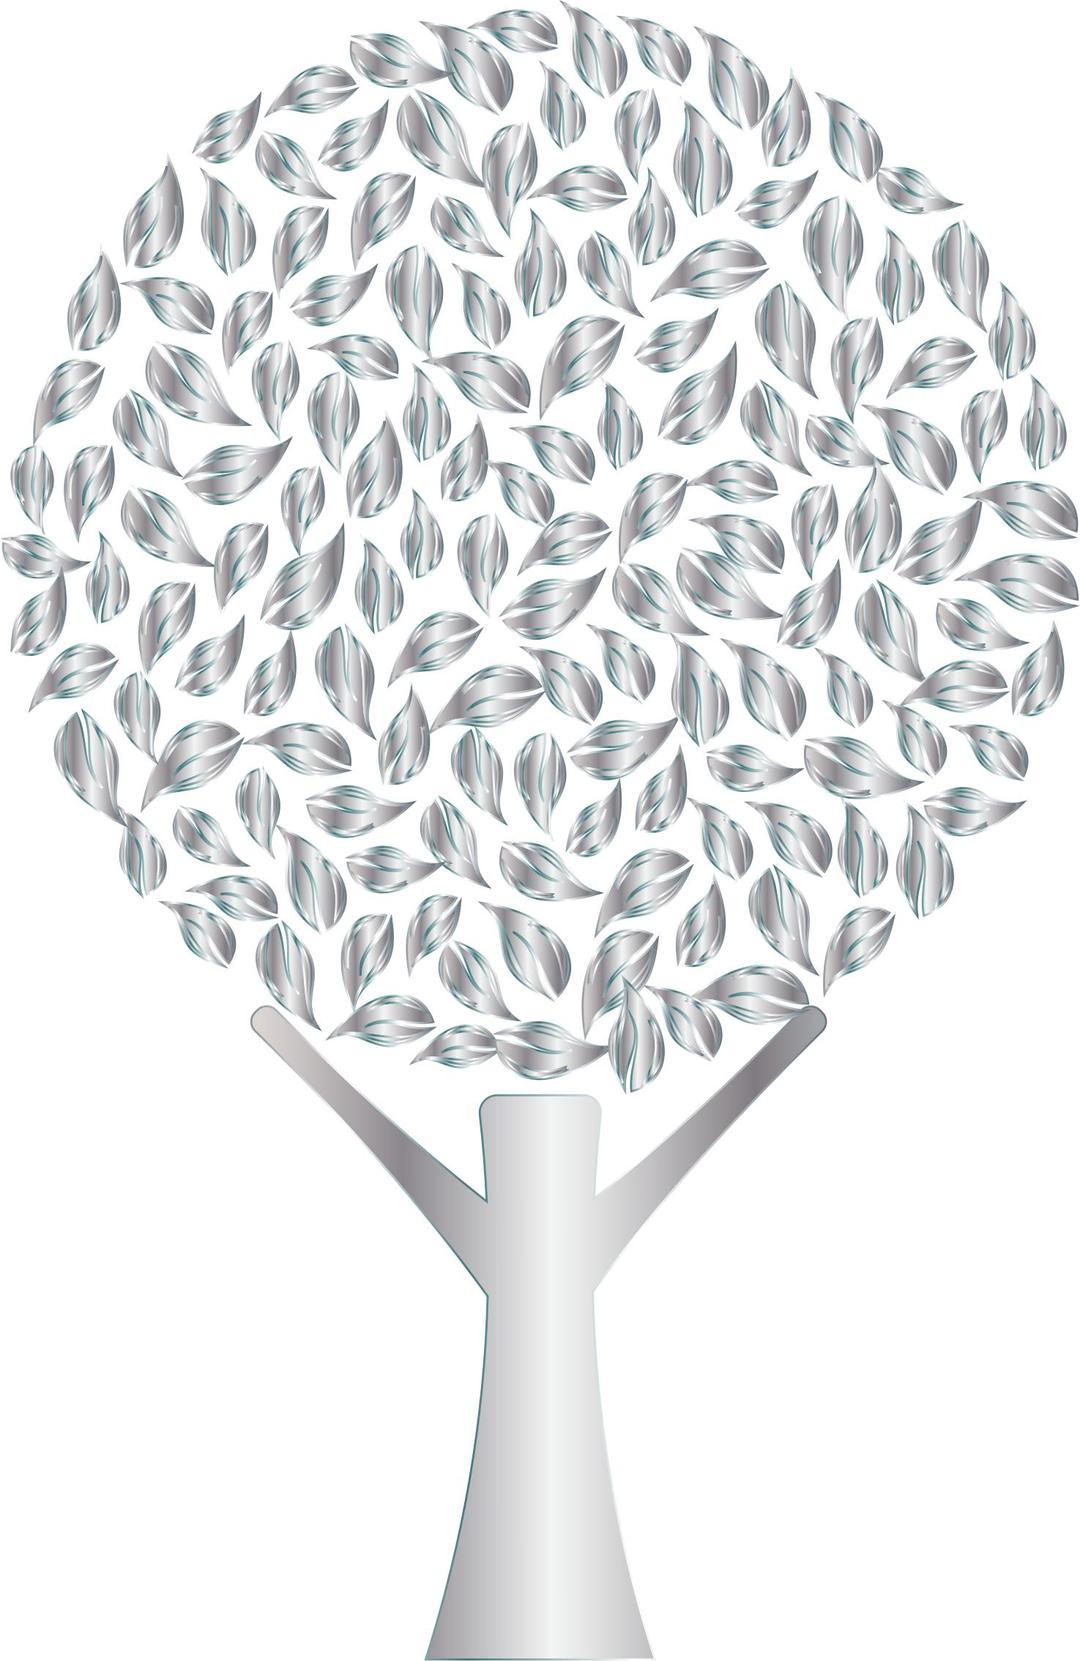 Silver Abstract Tree No Background png transparent